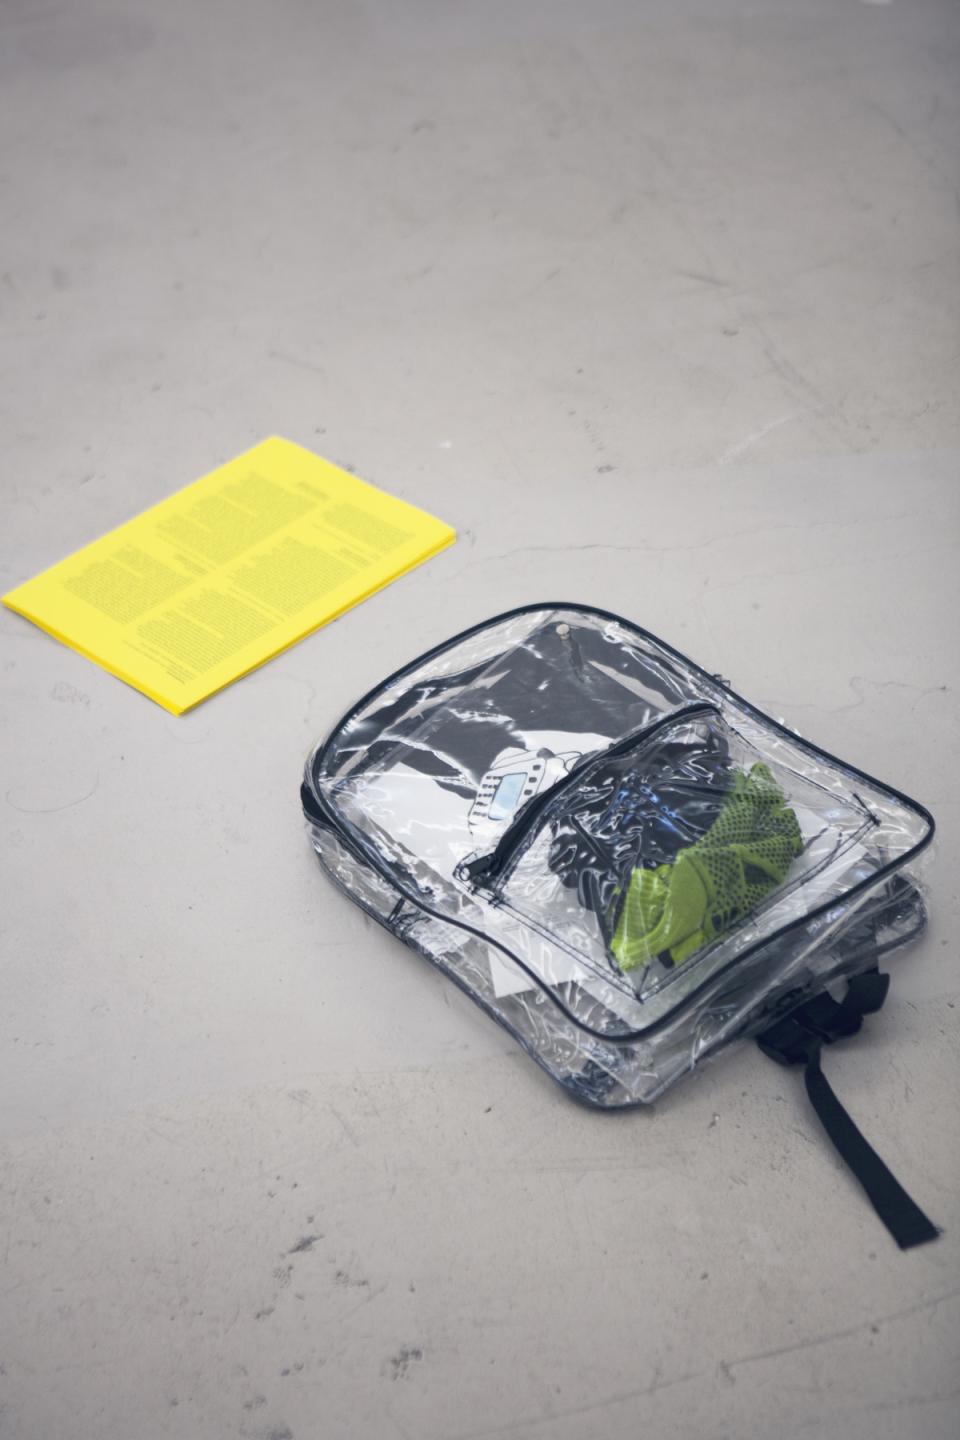 Transparencies: 3 (or 6) Definition..., 2018,Lecture Performance, Essay Draft, Transparent Backpack, Acrylic and Ink on Paper, Work Gloves, Scanning Device Holster